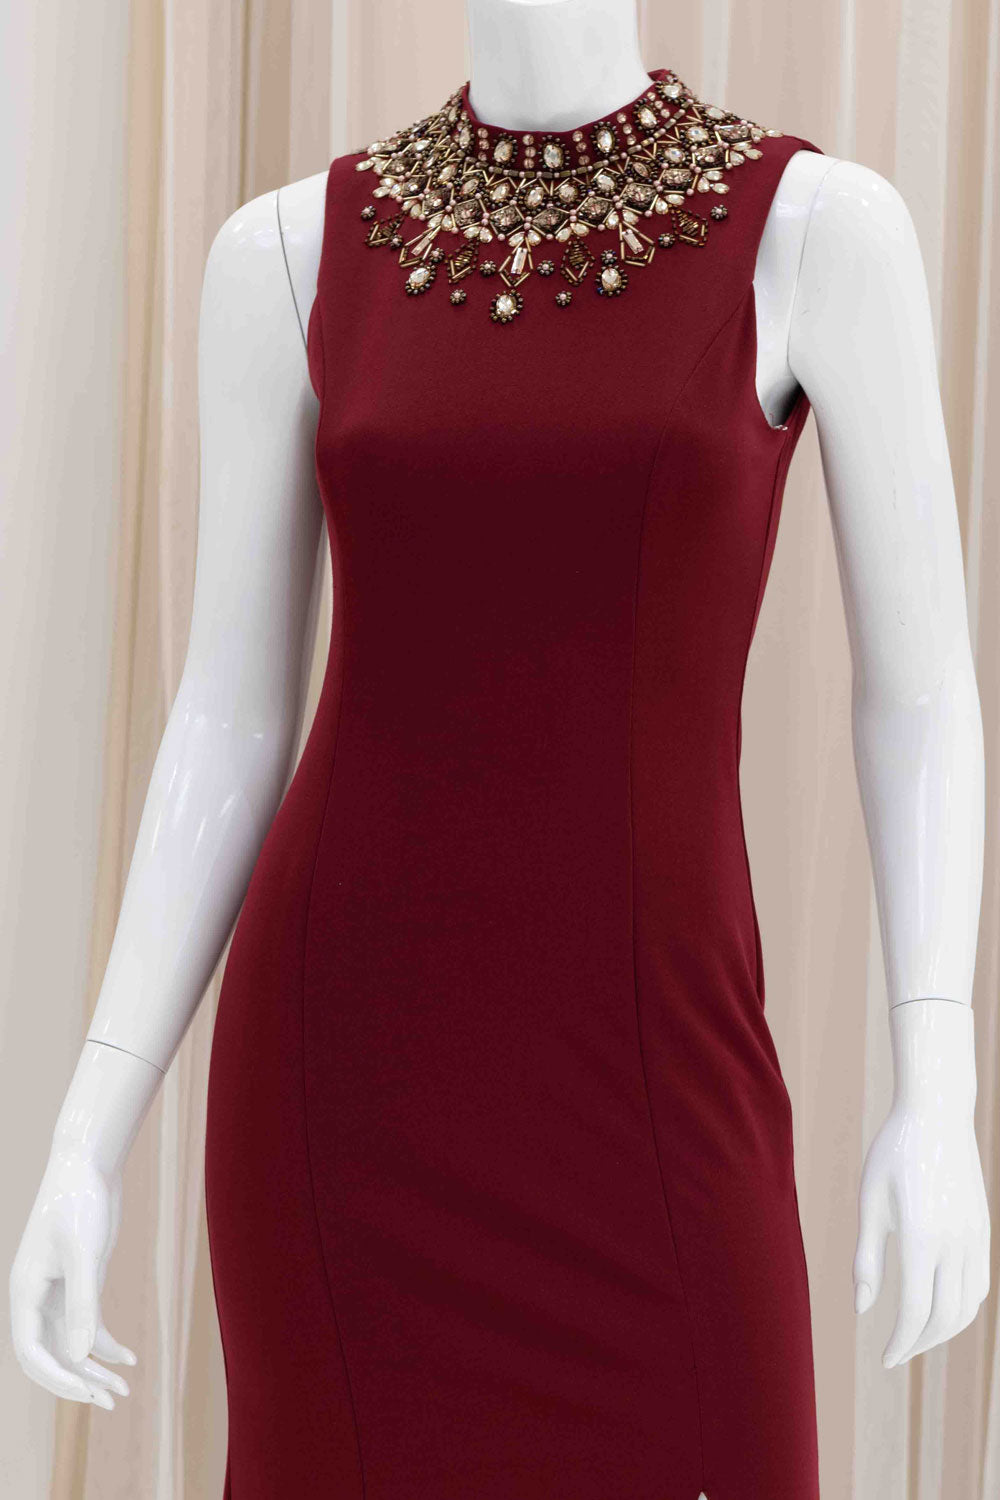 MOB Crepe Evening Gown in Burgundy